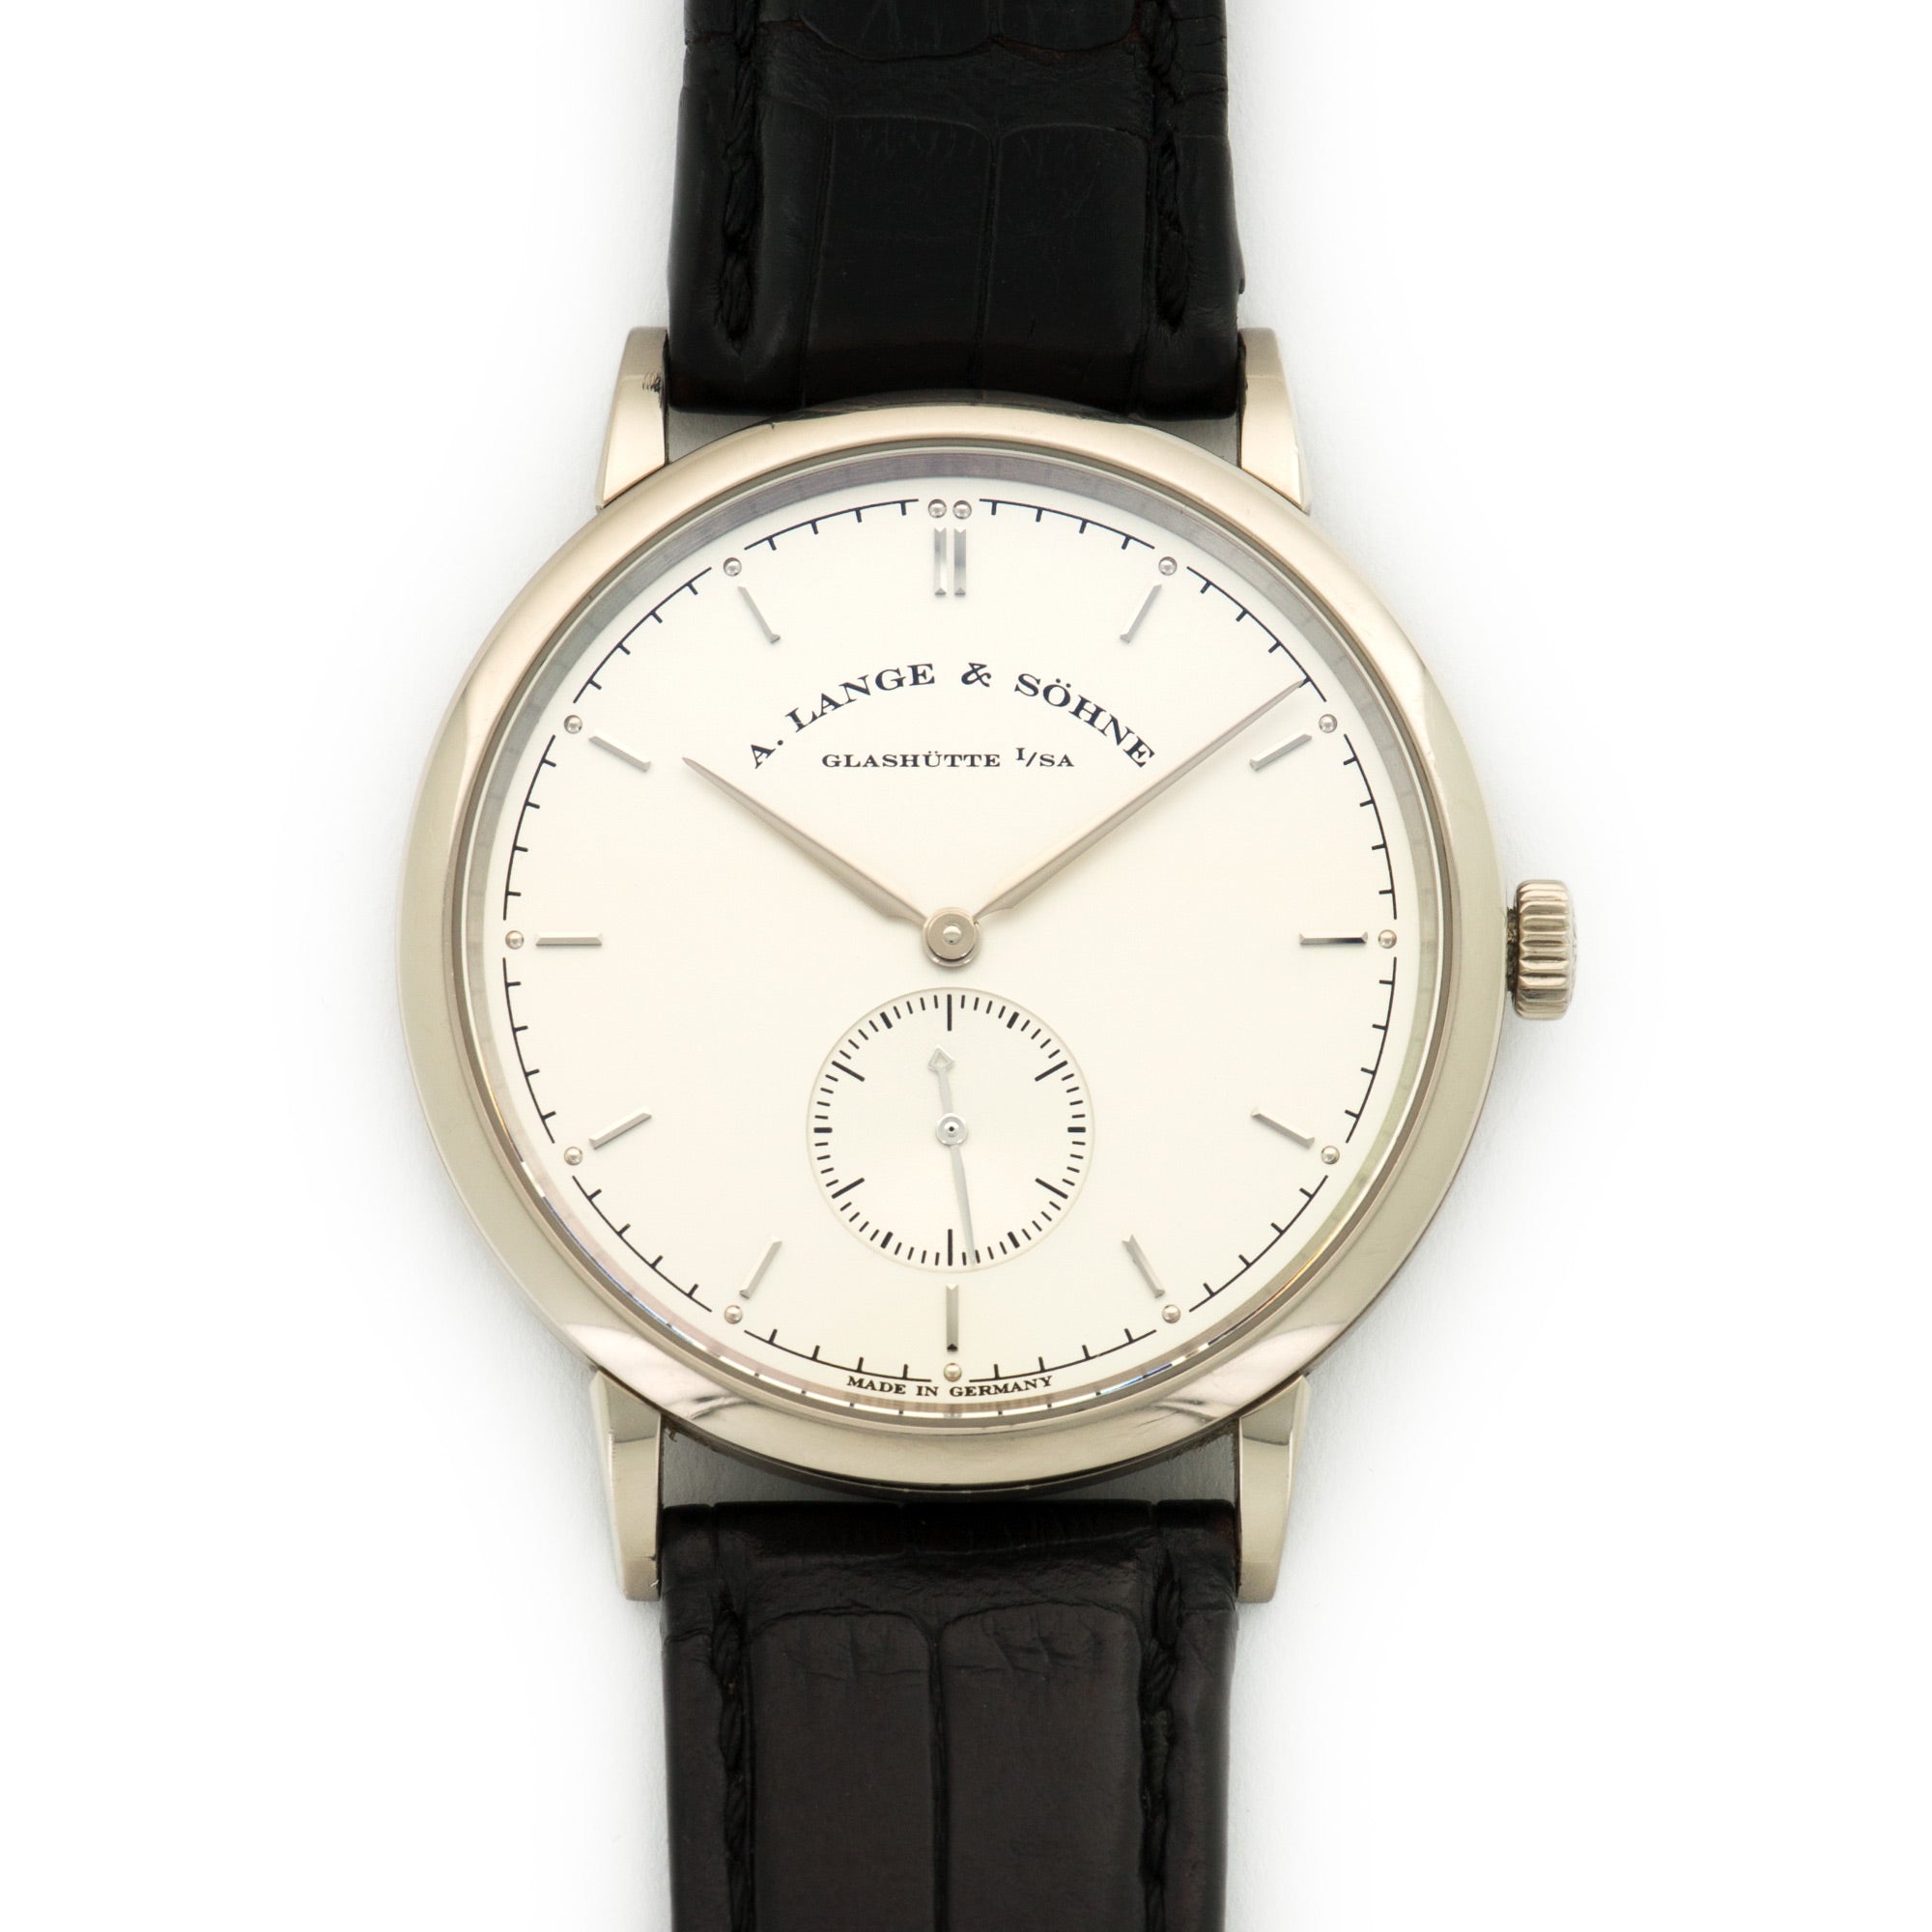 A. Lange & Sohne - A. Lange & Sohne White Gold Saxonia Watch Ref. 216.026 - The Keystone Watches